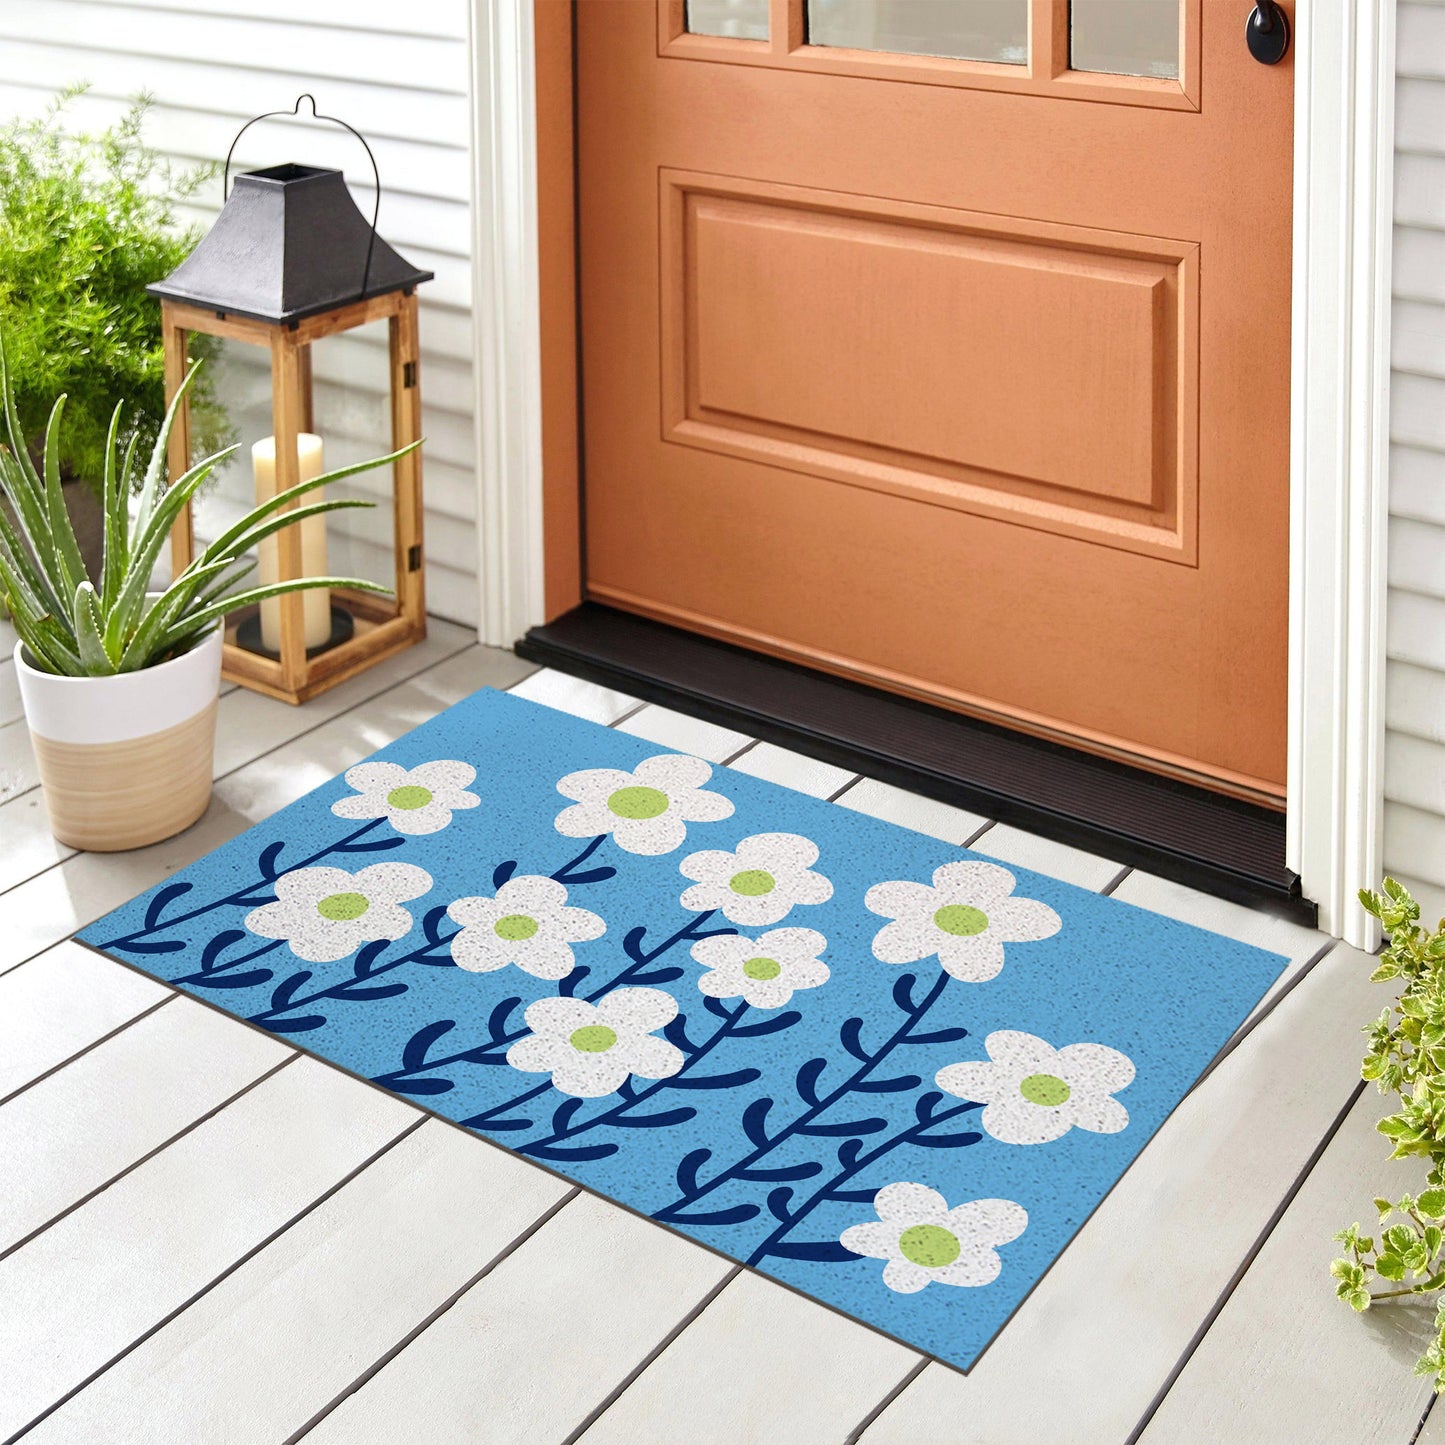 Feblilac White Flower and Blue Ground Door Mat, Country Style Flower Patio Welcome Doormat, Anti Skid PVC Coil Outdoor Mats, Front Mat for Home, Washable Entryway Doormat - Feblilac® Mat